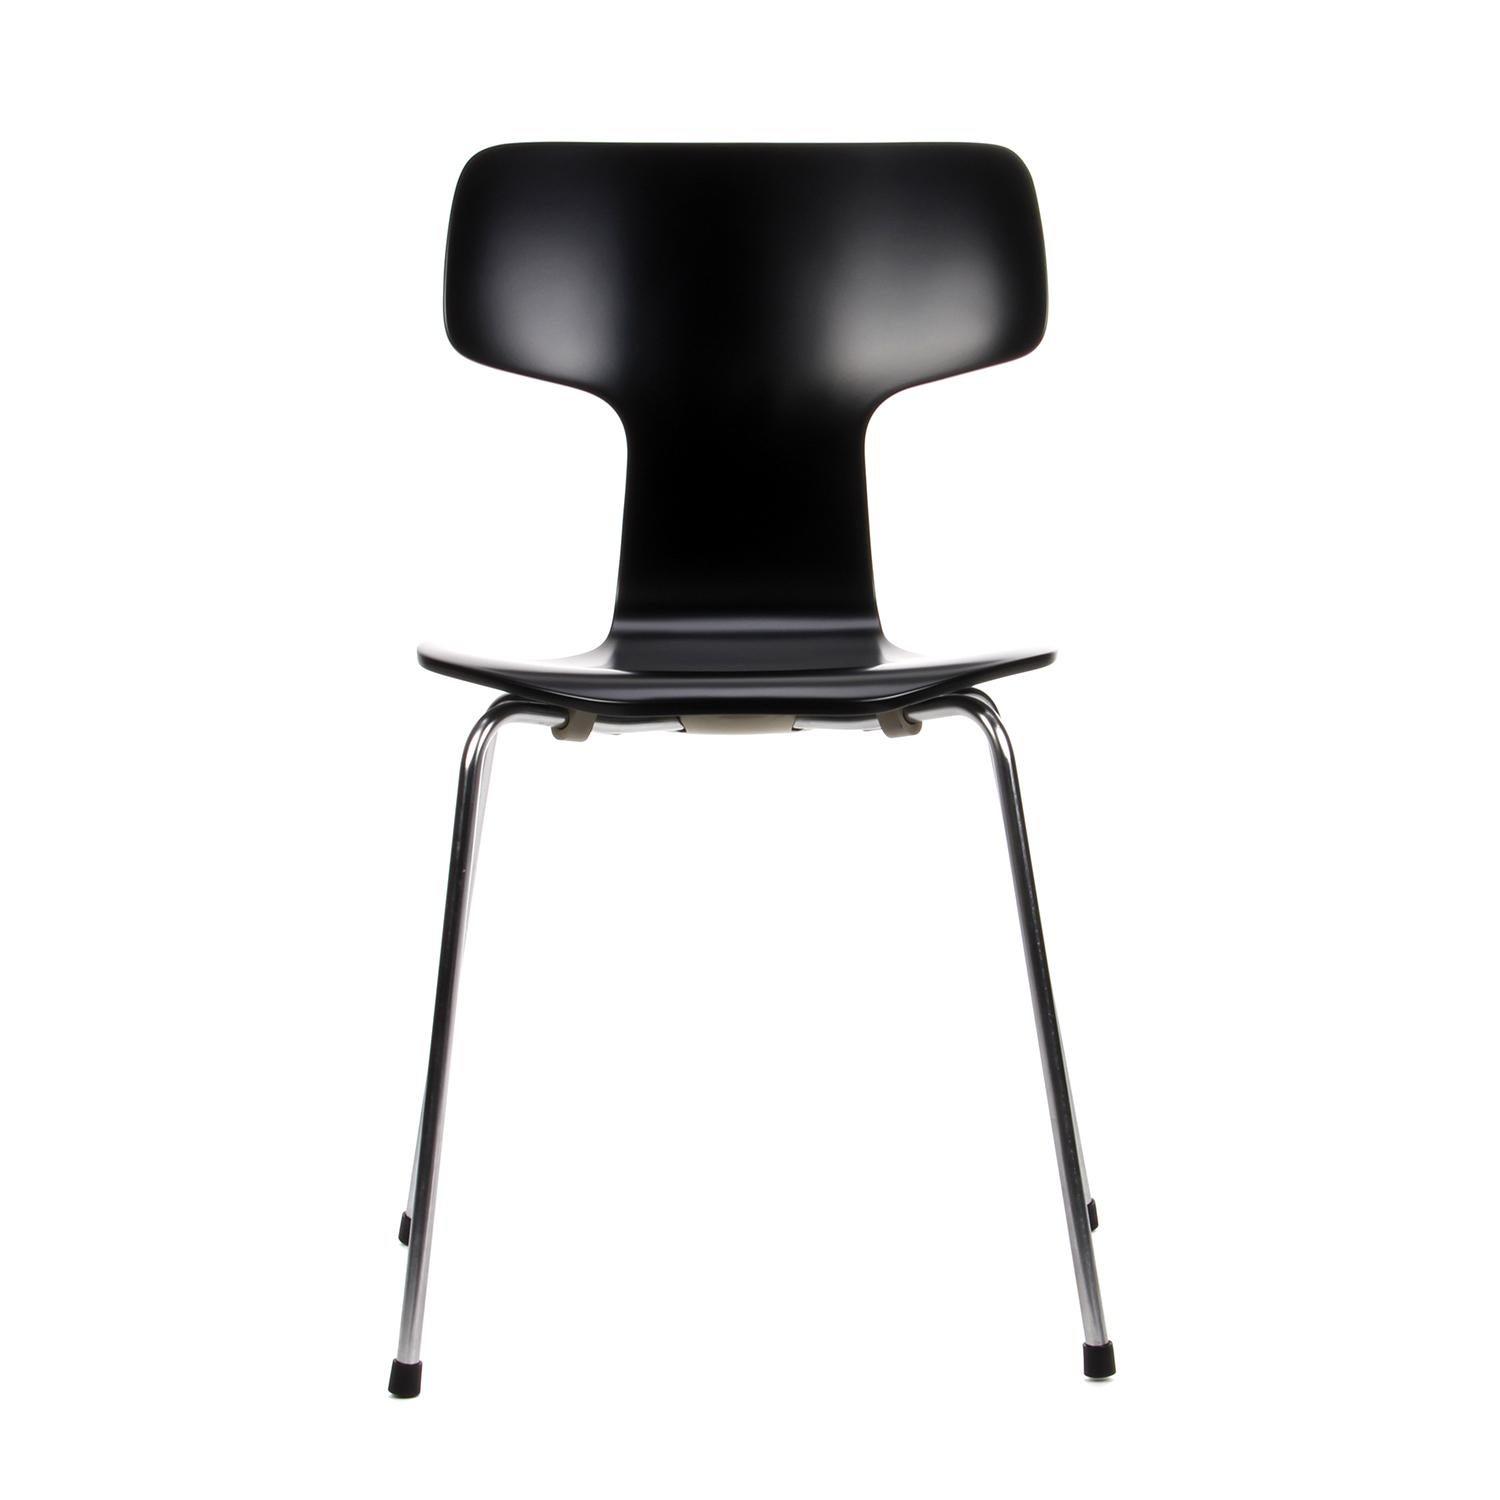 Original vintage T-chair, fully restored and re-lacquered in a silk semi-gloss black finish (the original Fritz Hansen black) - done by the premiere furniture lacquering company in Denmark - so essentially you will be getting a vintage black